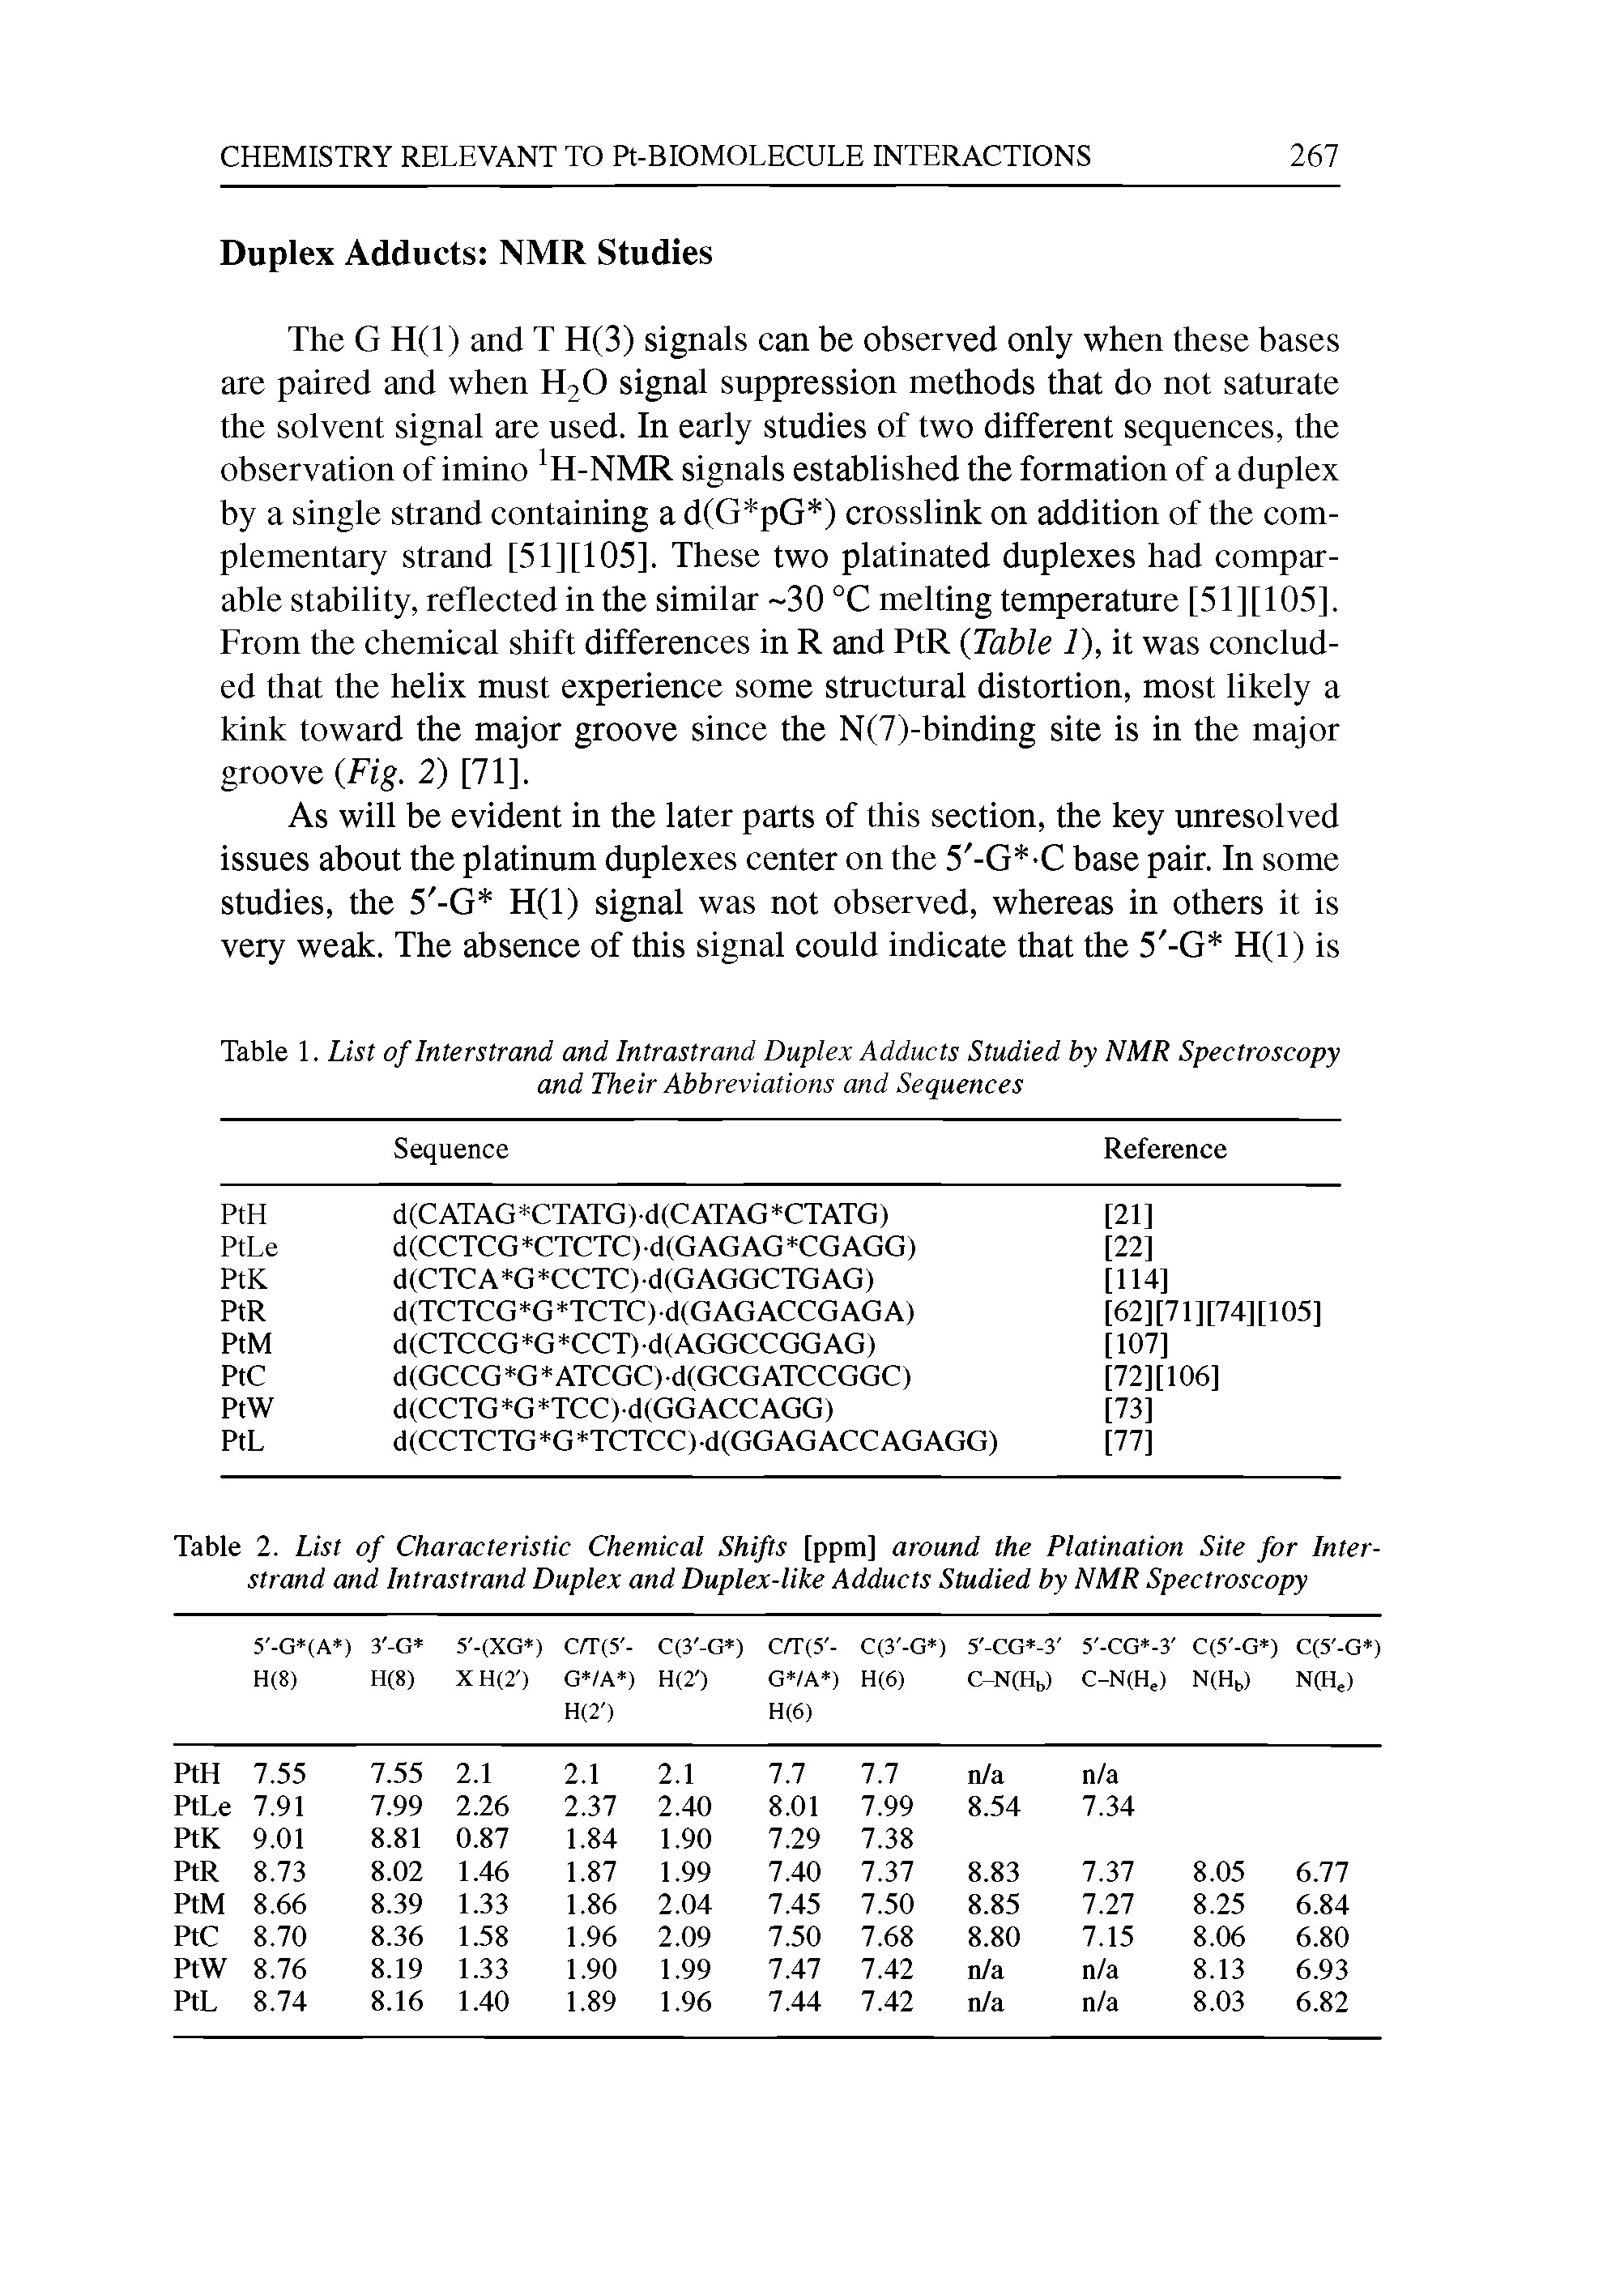 Table 1. List of Interstrand and Intrastrand Duplex Adducts Studied by NMR Spectroscopy and Their Abbreviations and Sequences...